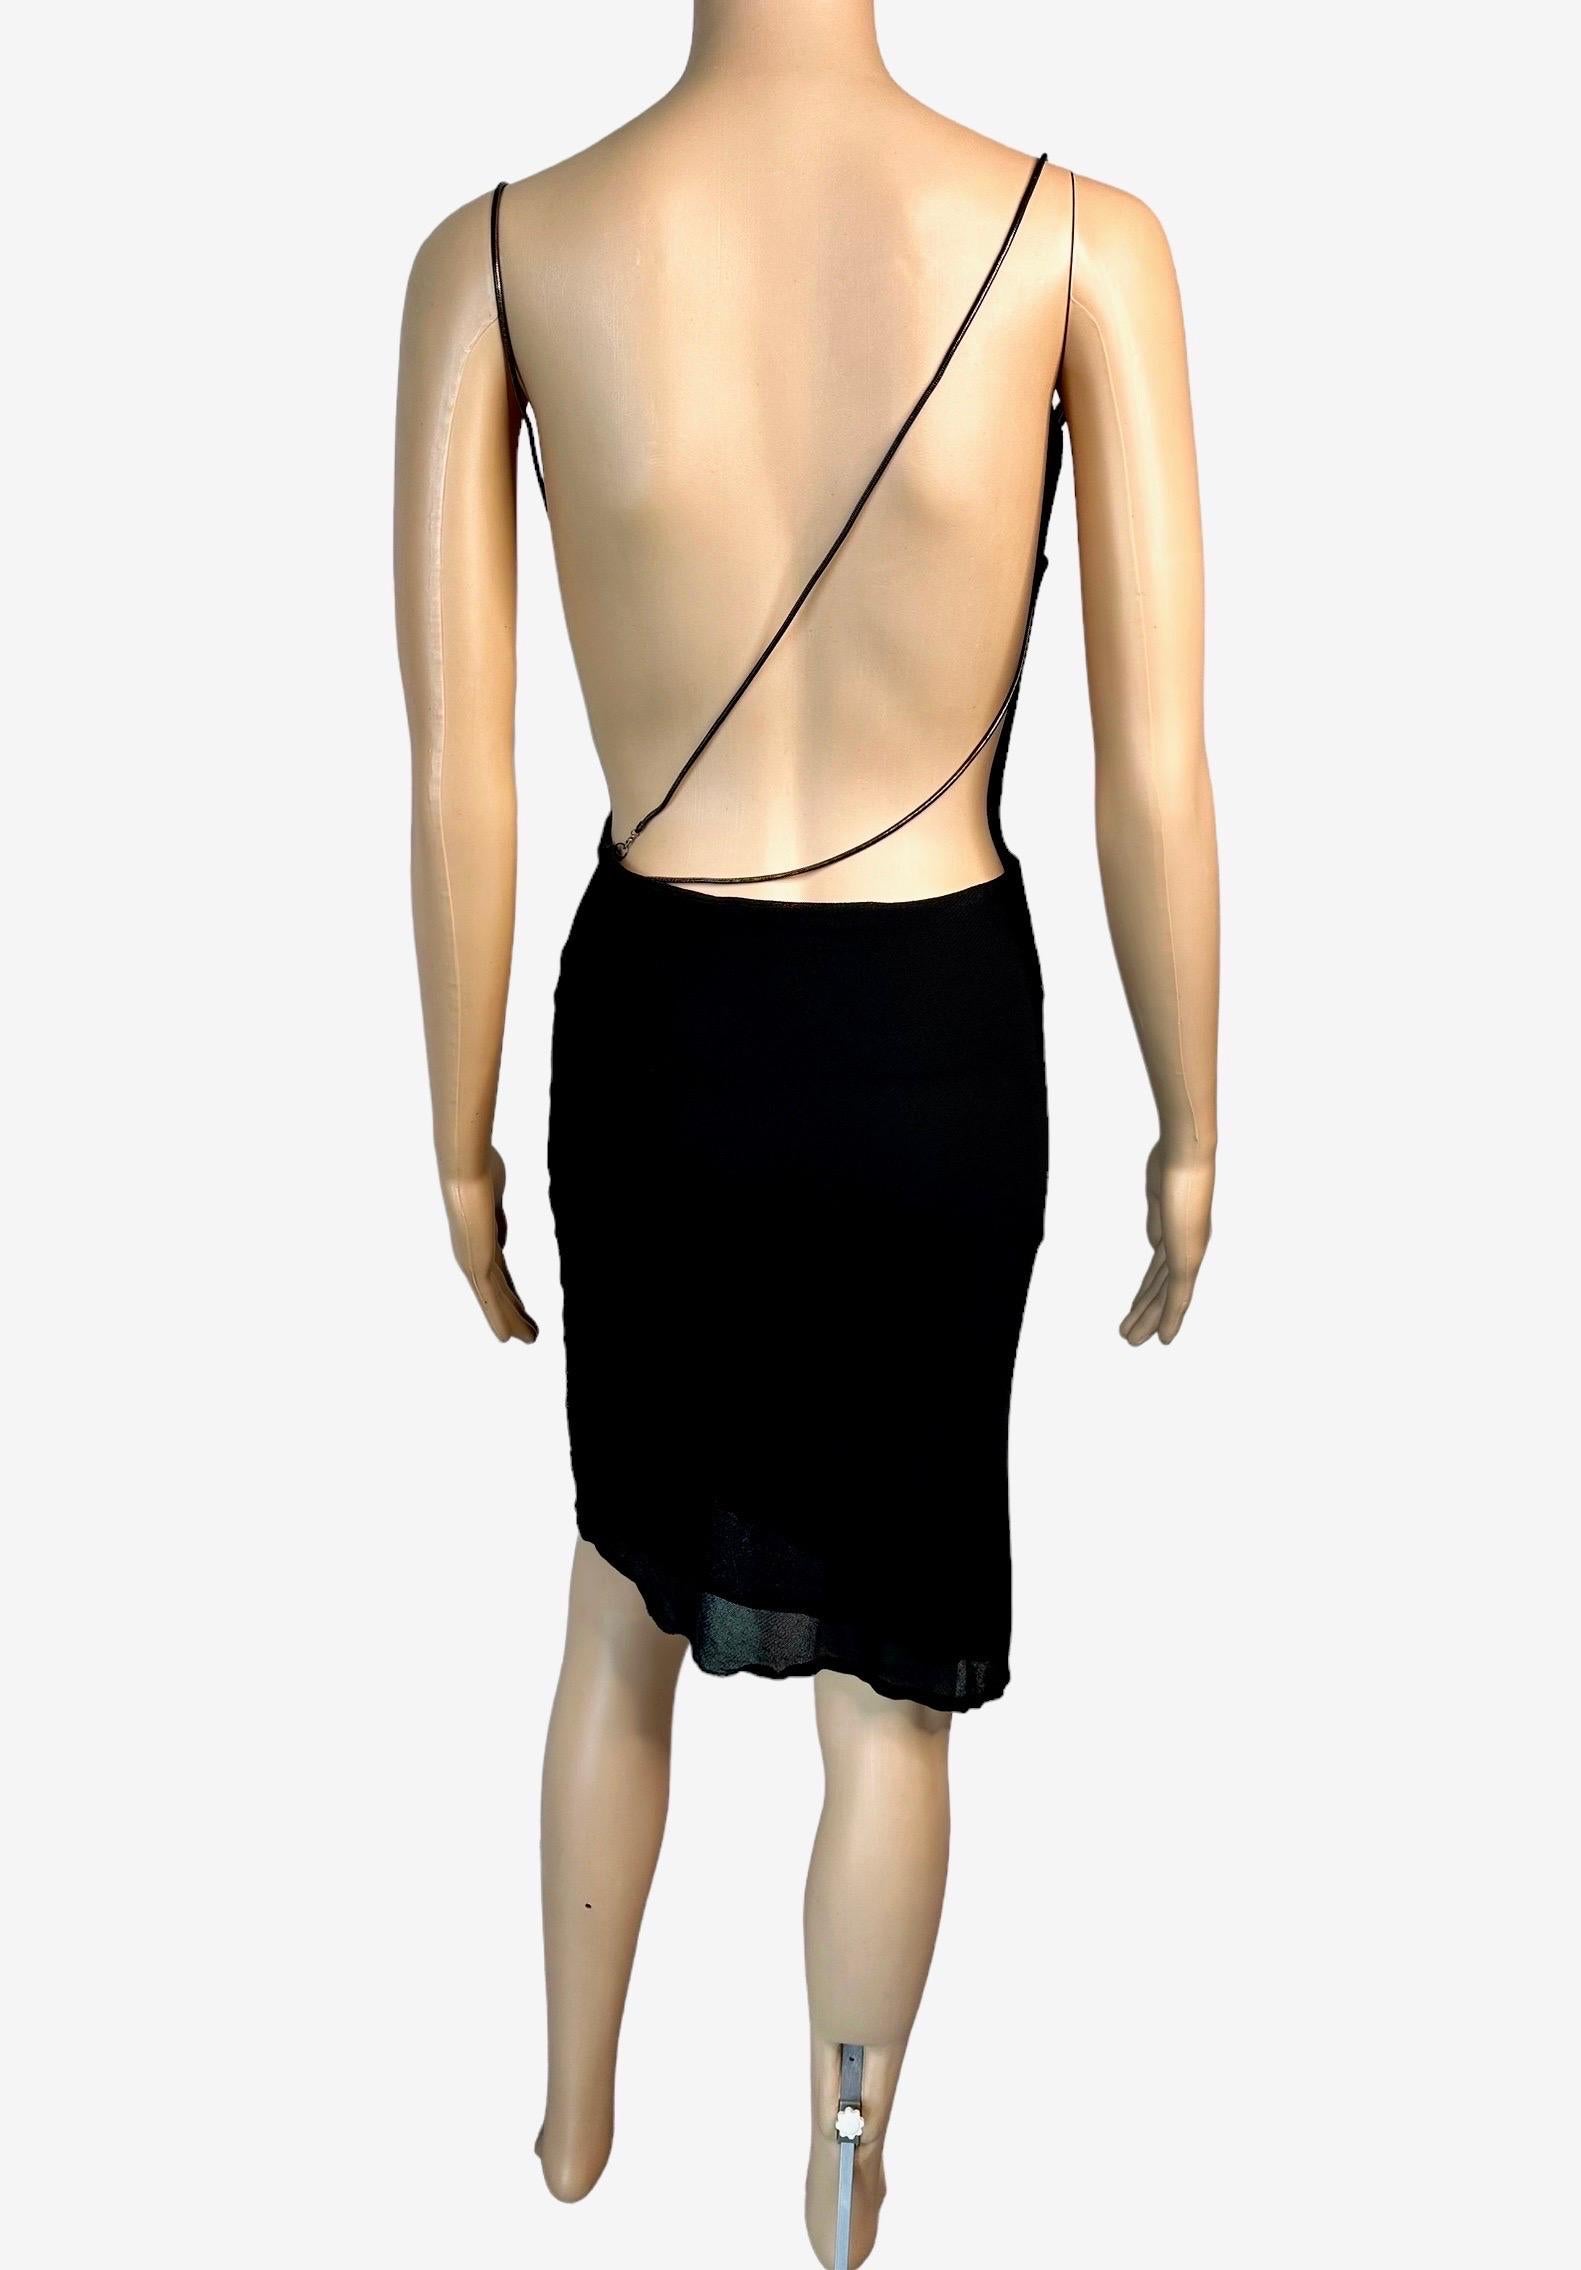 Tom Ford for Gucci S/S 1997 Runway Chain Cutout Backless Sheer Knit Black Dress For Sale 9